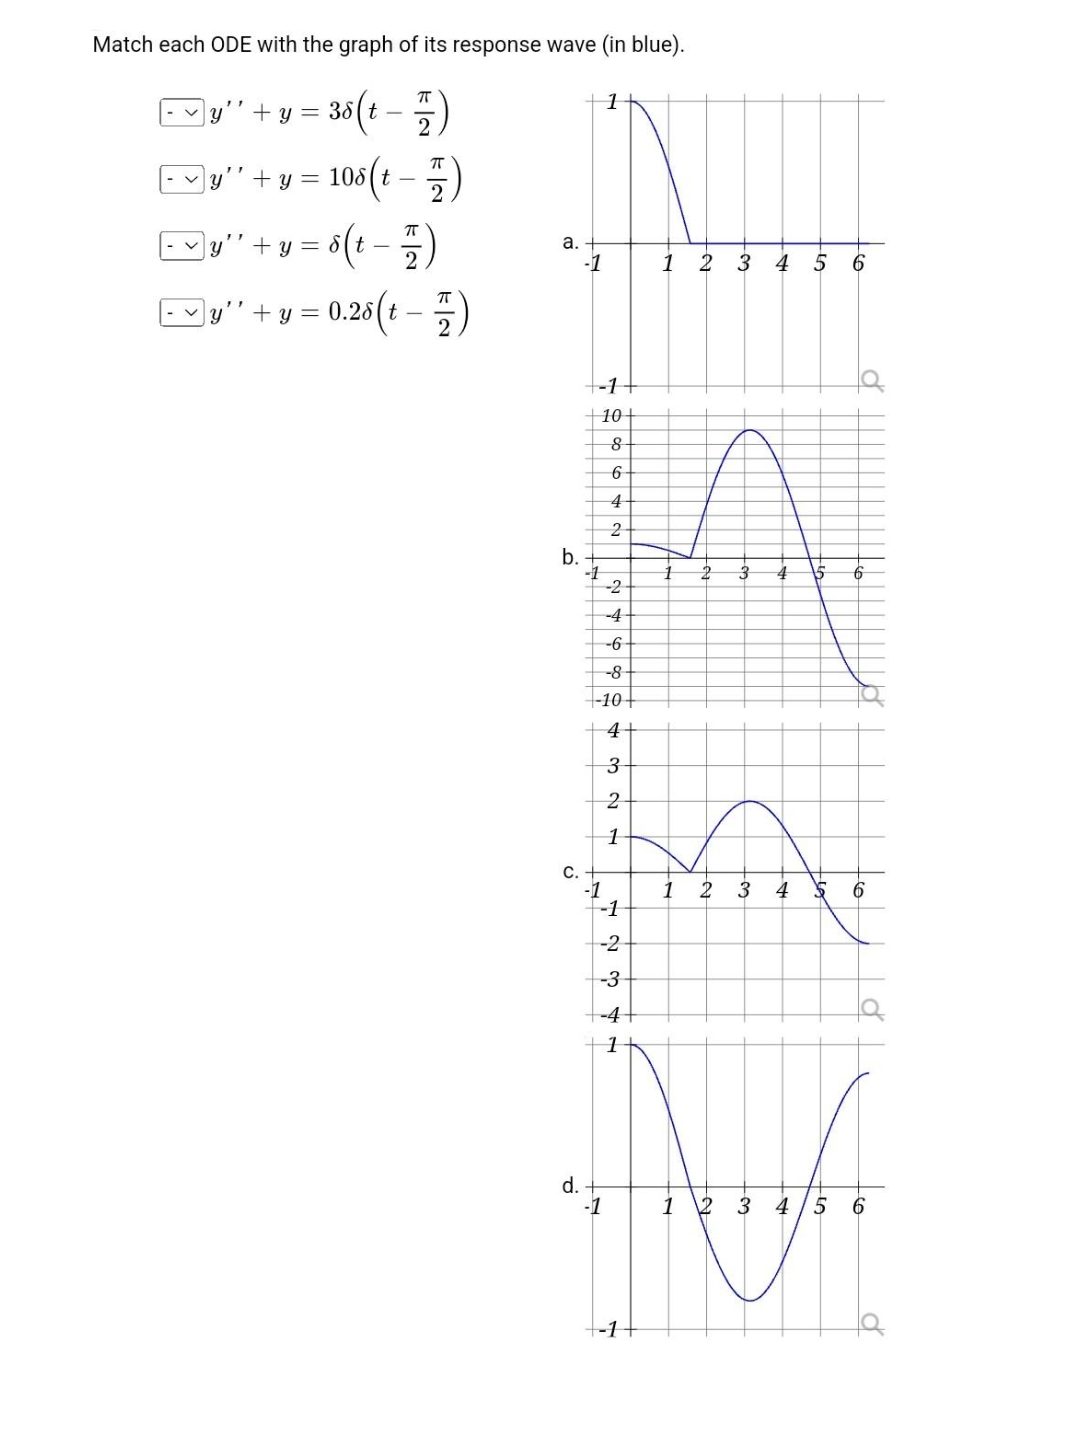 Match each ODE with the graph of its response wave (in blue).
ㅠ
1
y'' + y = 38(t-
2
y"' + y =
108 (t
]y" + y =
8( t - 7)
$(t
]y" + y = 0.28 (t -7)
ㅠ
품)
a.
b.
C.
d.
-1
+-1+
10-
-1
-1
19642
8
-1
24669
-2
-4
-6
-10 +
4+
-8
321
-1
-2
-3
-4+
1
-1
1 2 3 4
2 3
1 2 3 4
2 3 4
5 6
-LO
5
d
6
6